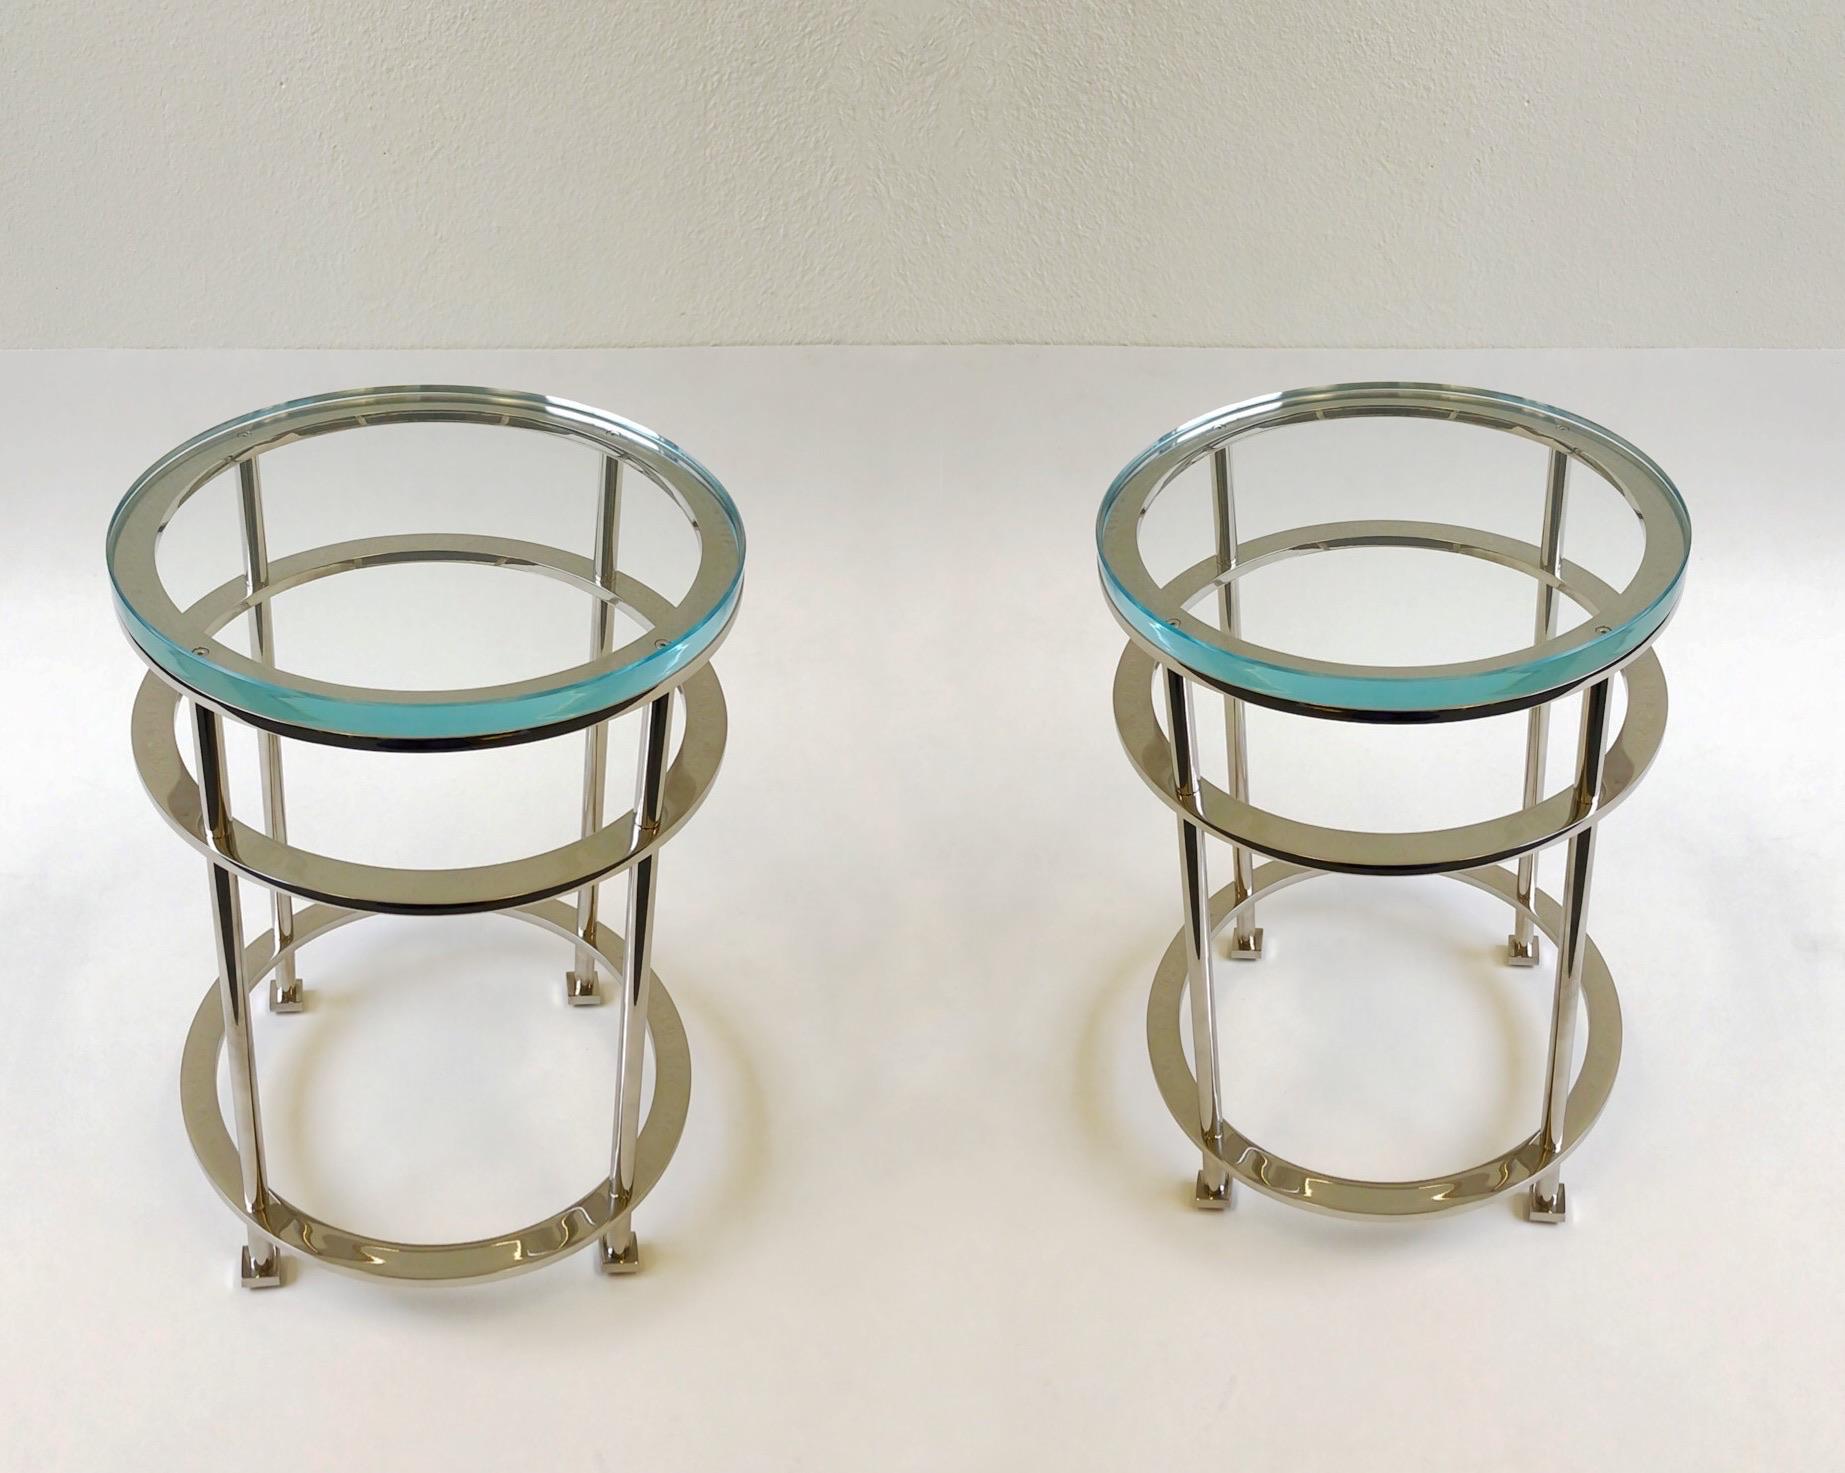 An exceptional pair of polish nickel and clear Lucite occasional tables design by French designer Jean Michel Wilmotte for Mirak in the 1980s. The tables have new 1” thick Lucite tops. The tables are solid steel that’s polished nickel